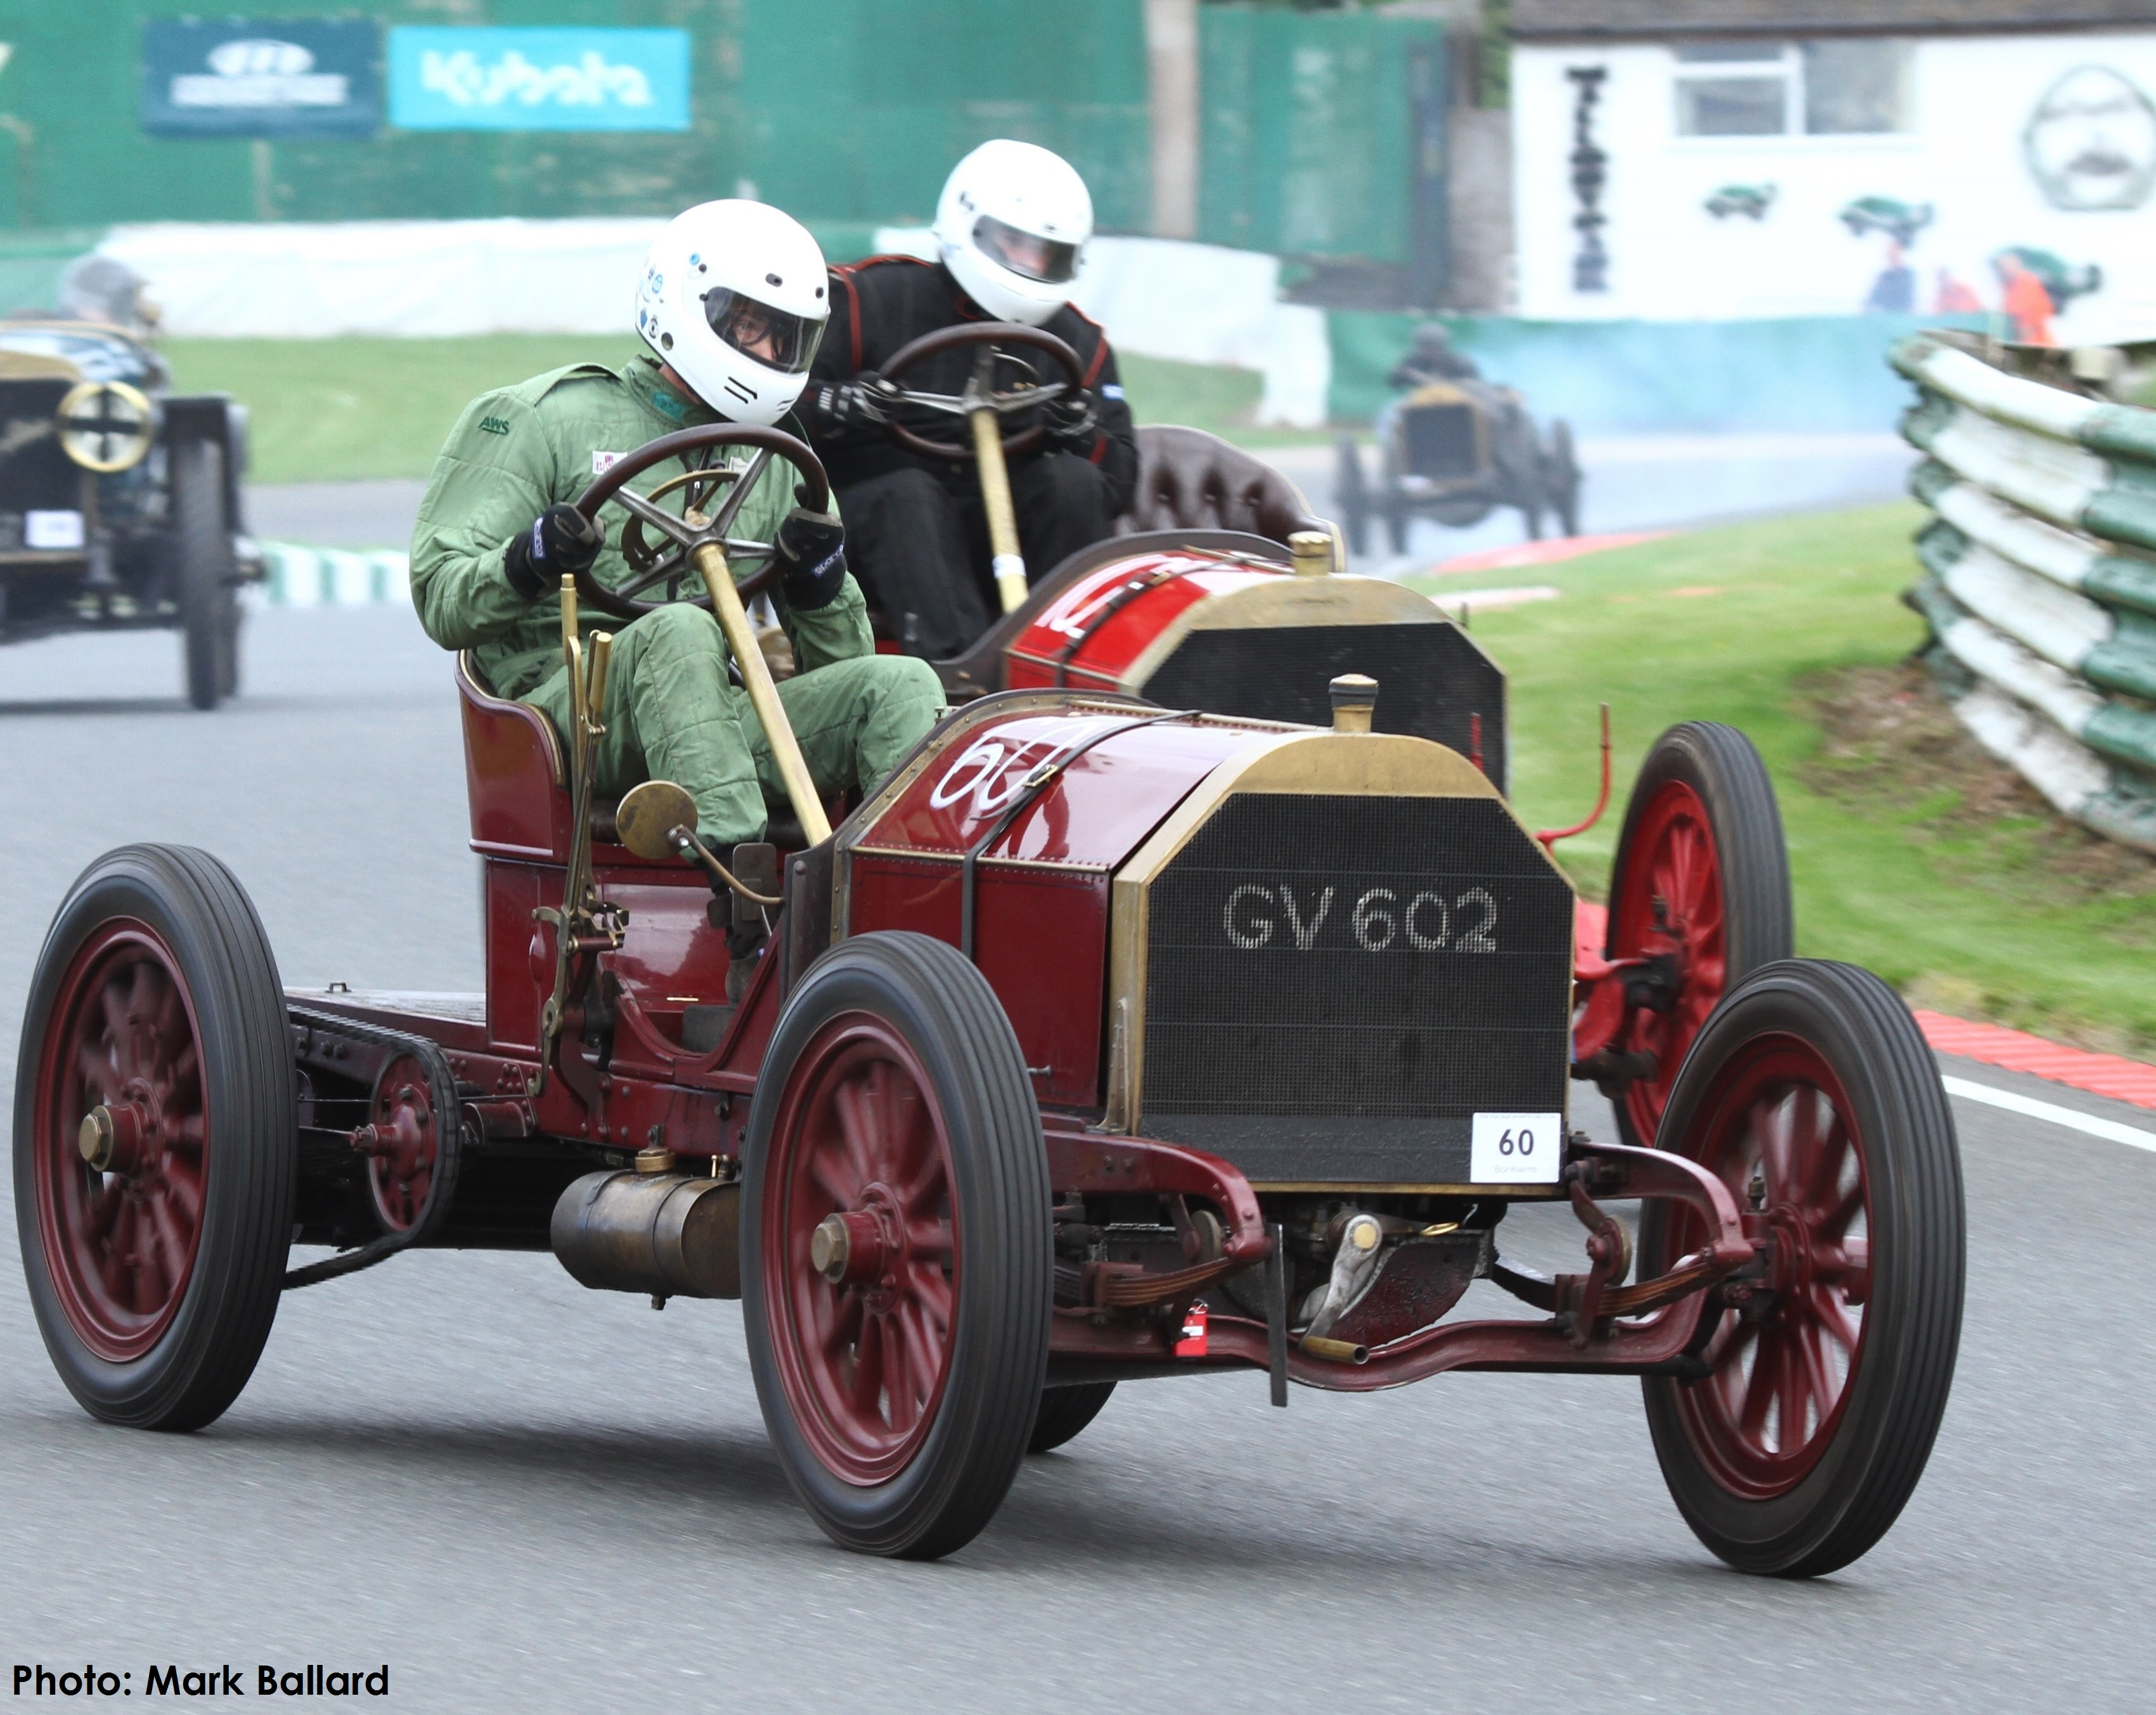 Calling all Leicestershire-based VSCC Members and Fans! cover